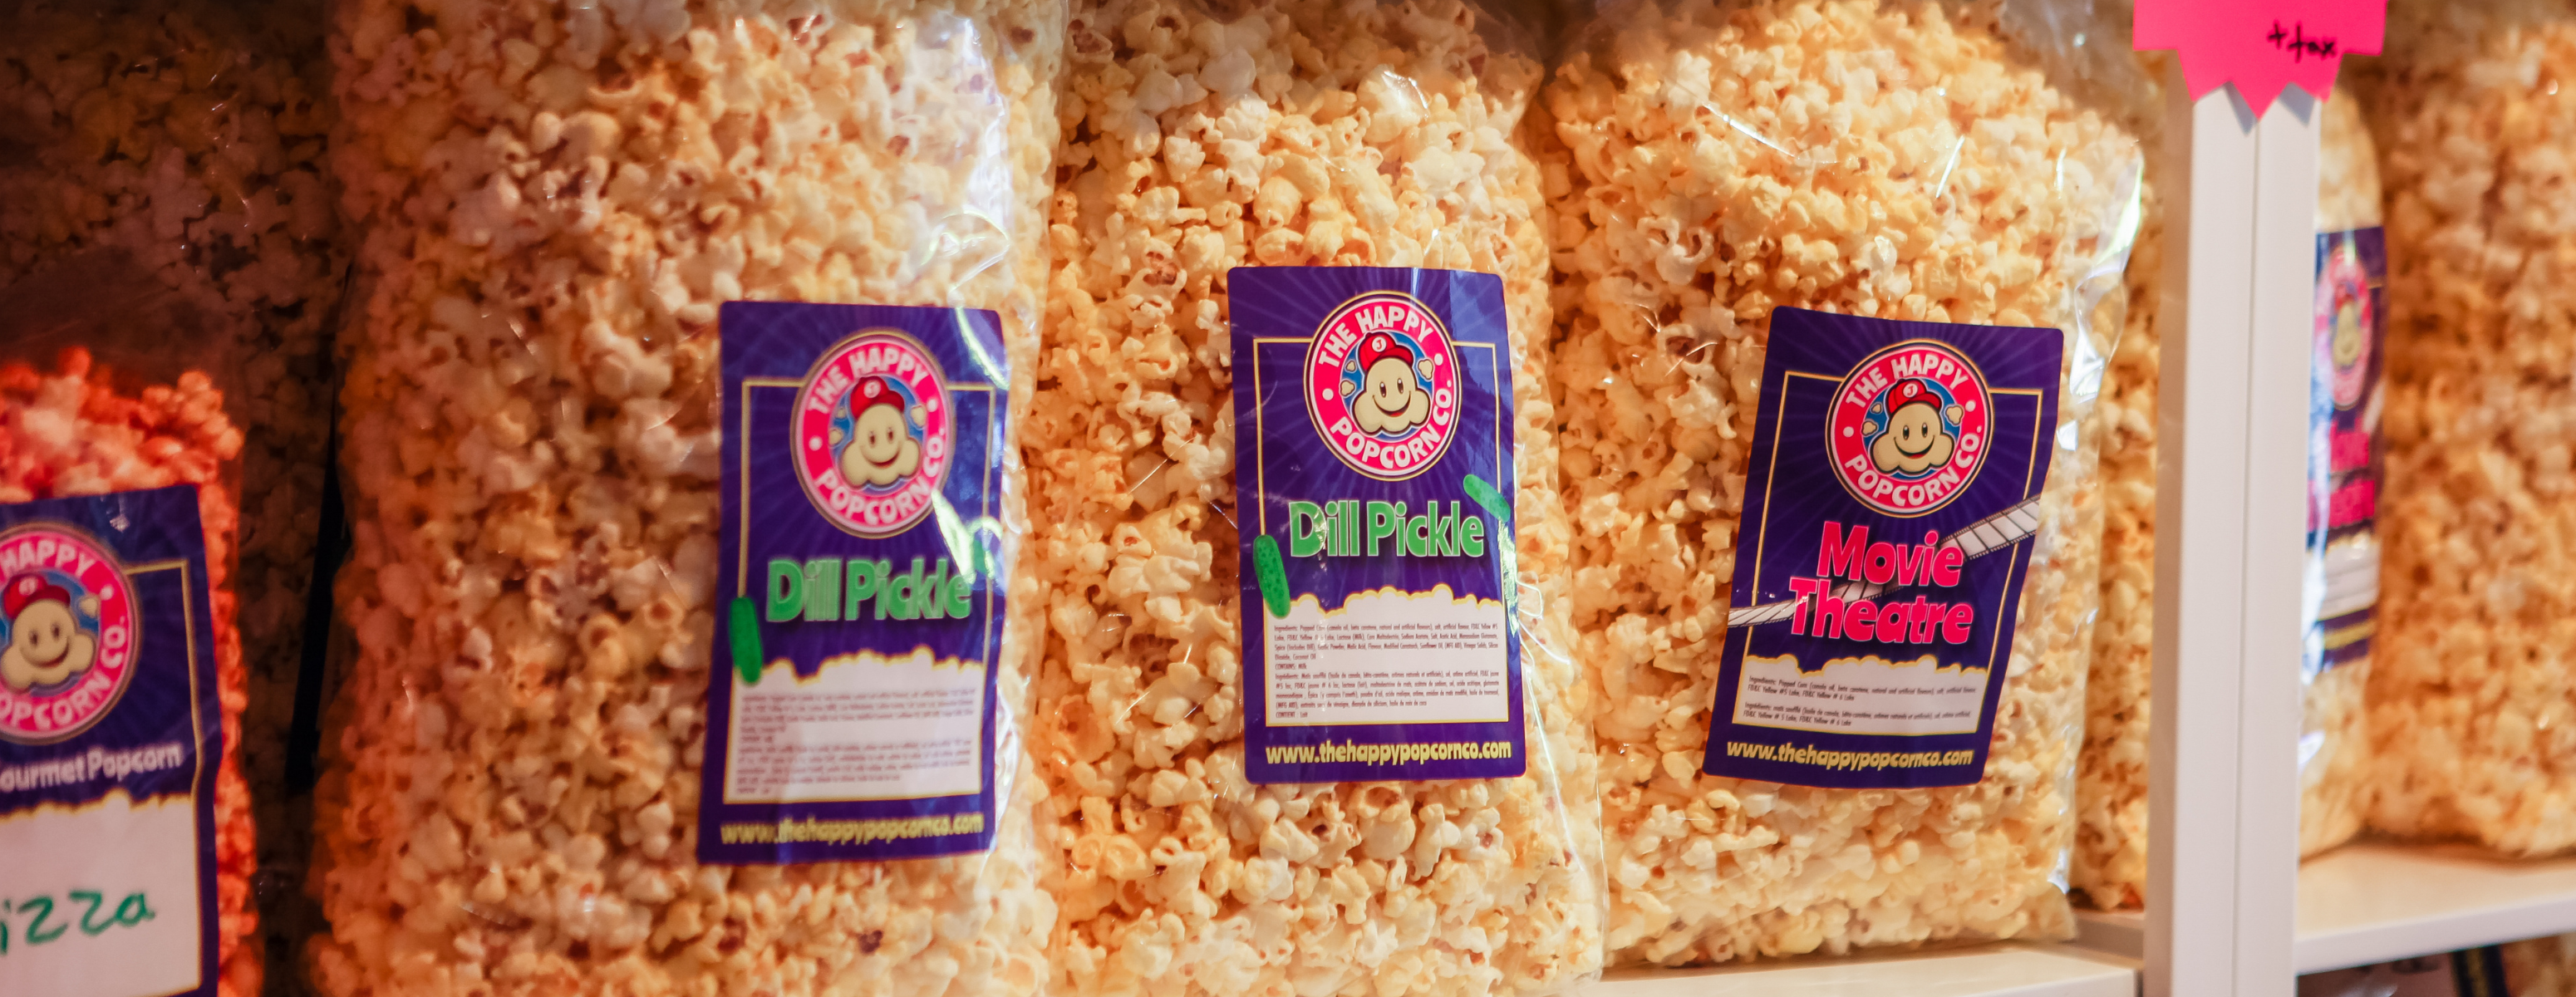 Gourmet popcorn made and sold by The Happy Popcorn Co.